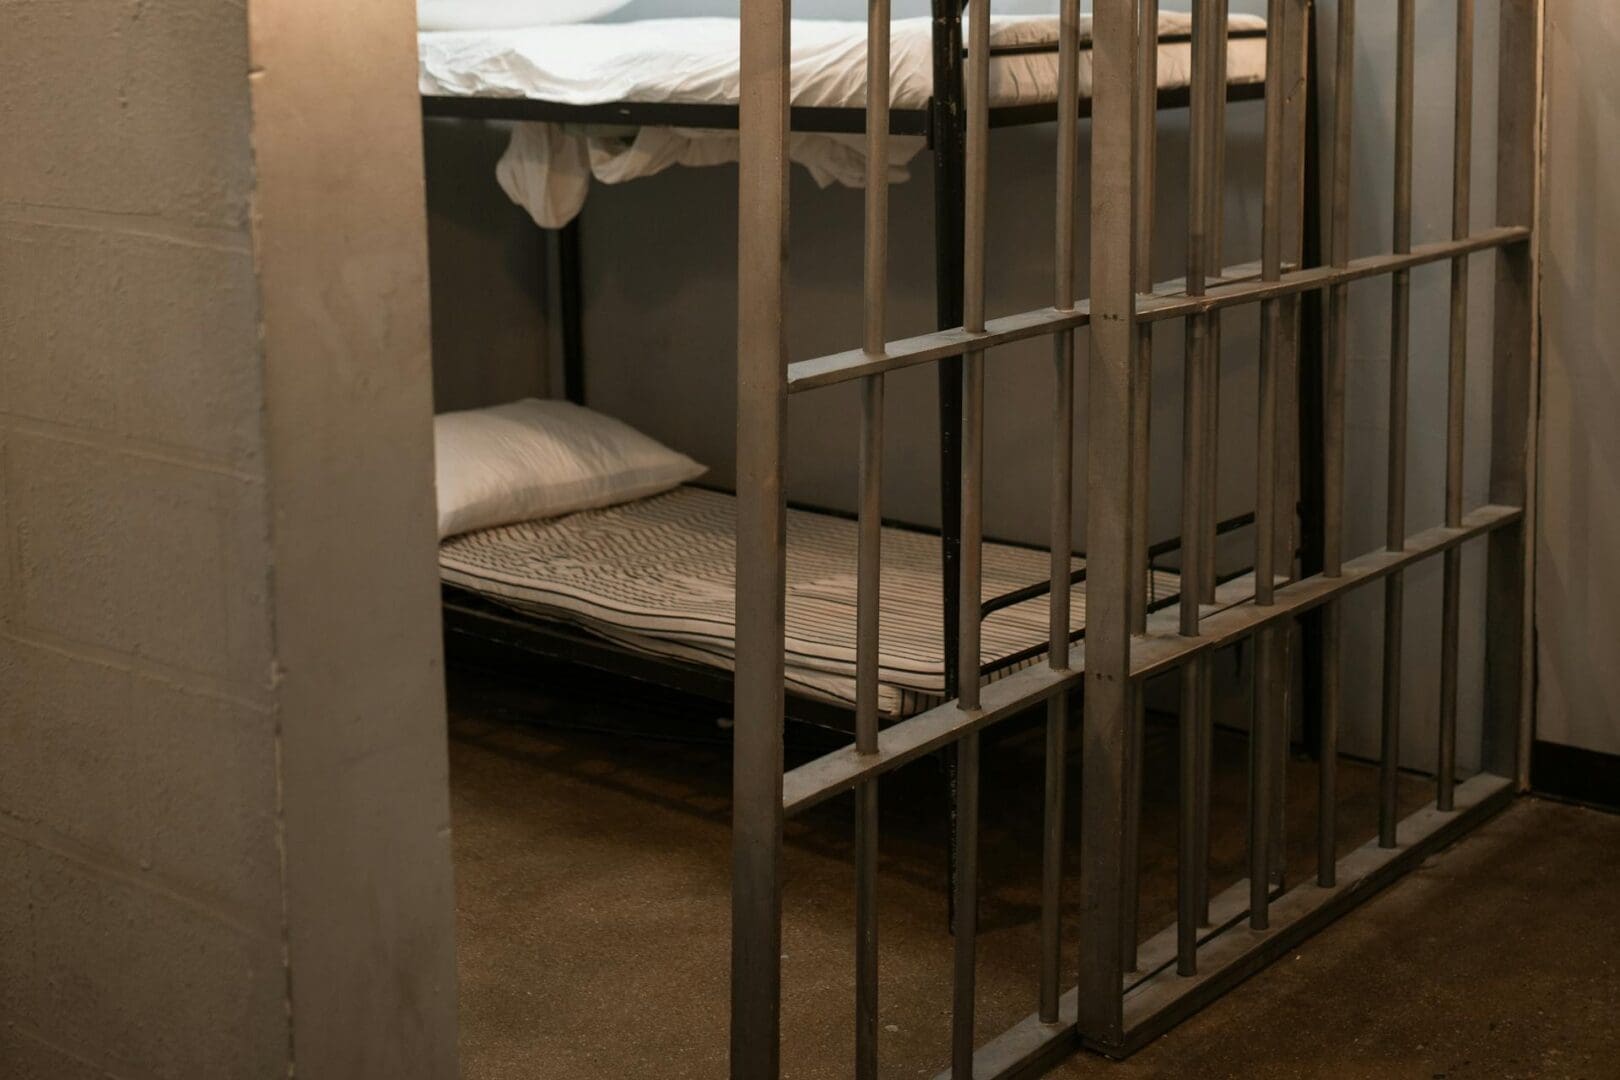 A bed in a prison cell.